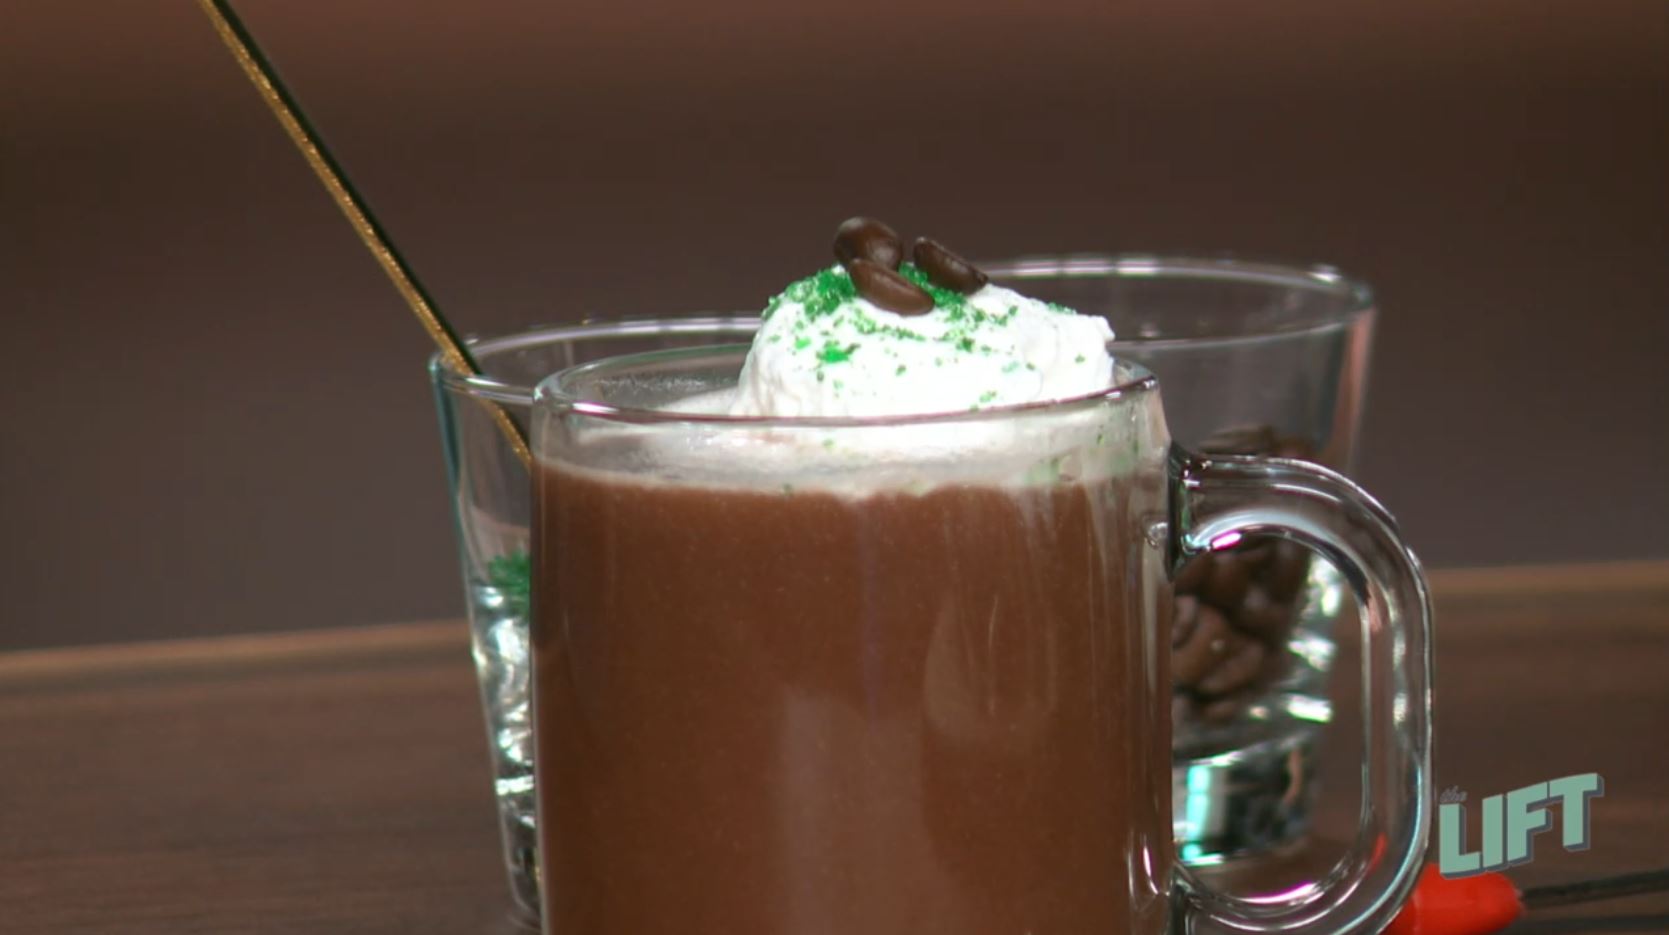 The Snow Bunny Hot Chocolate drink